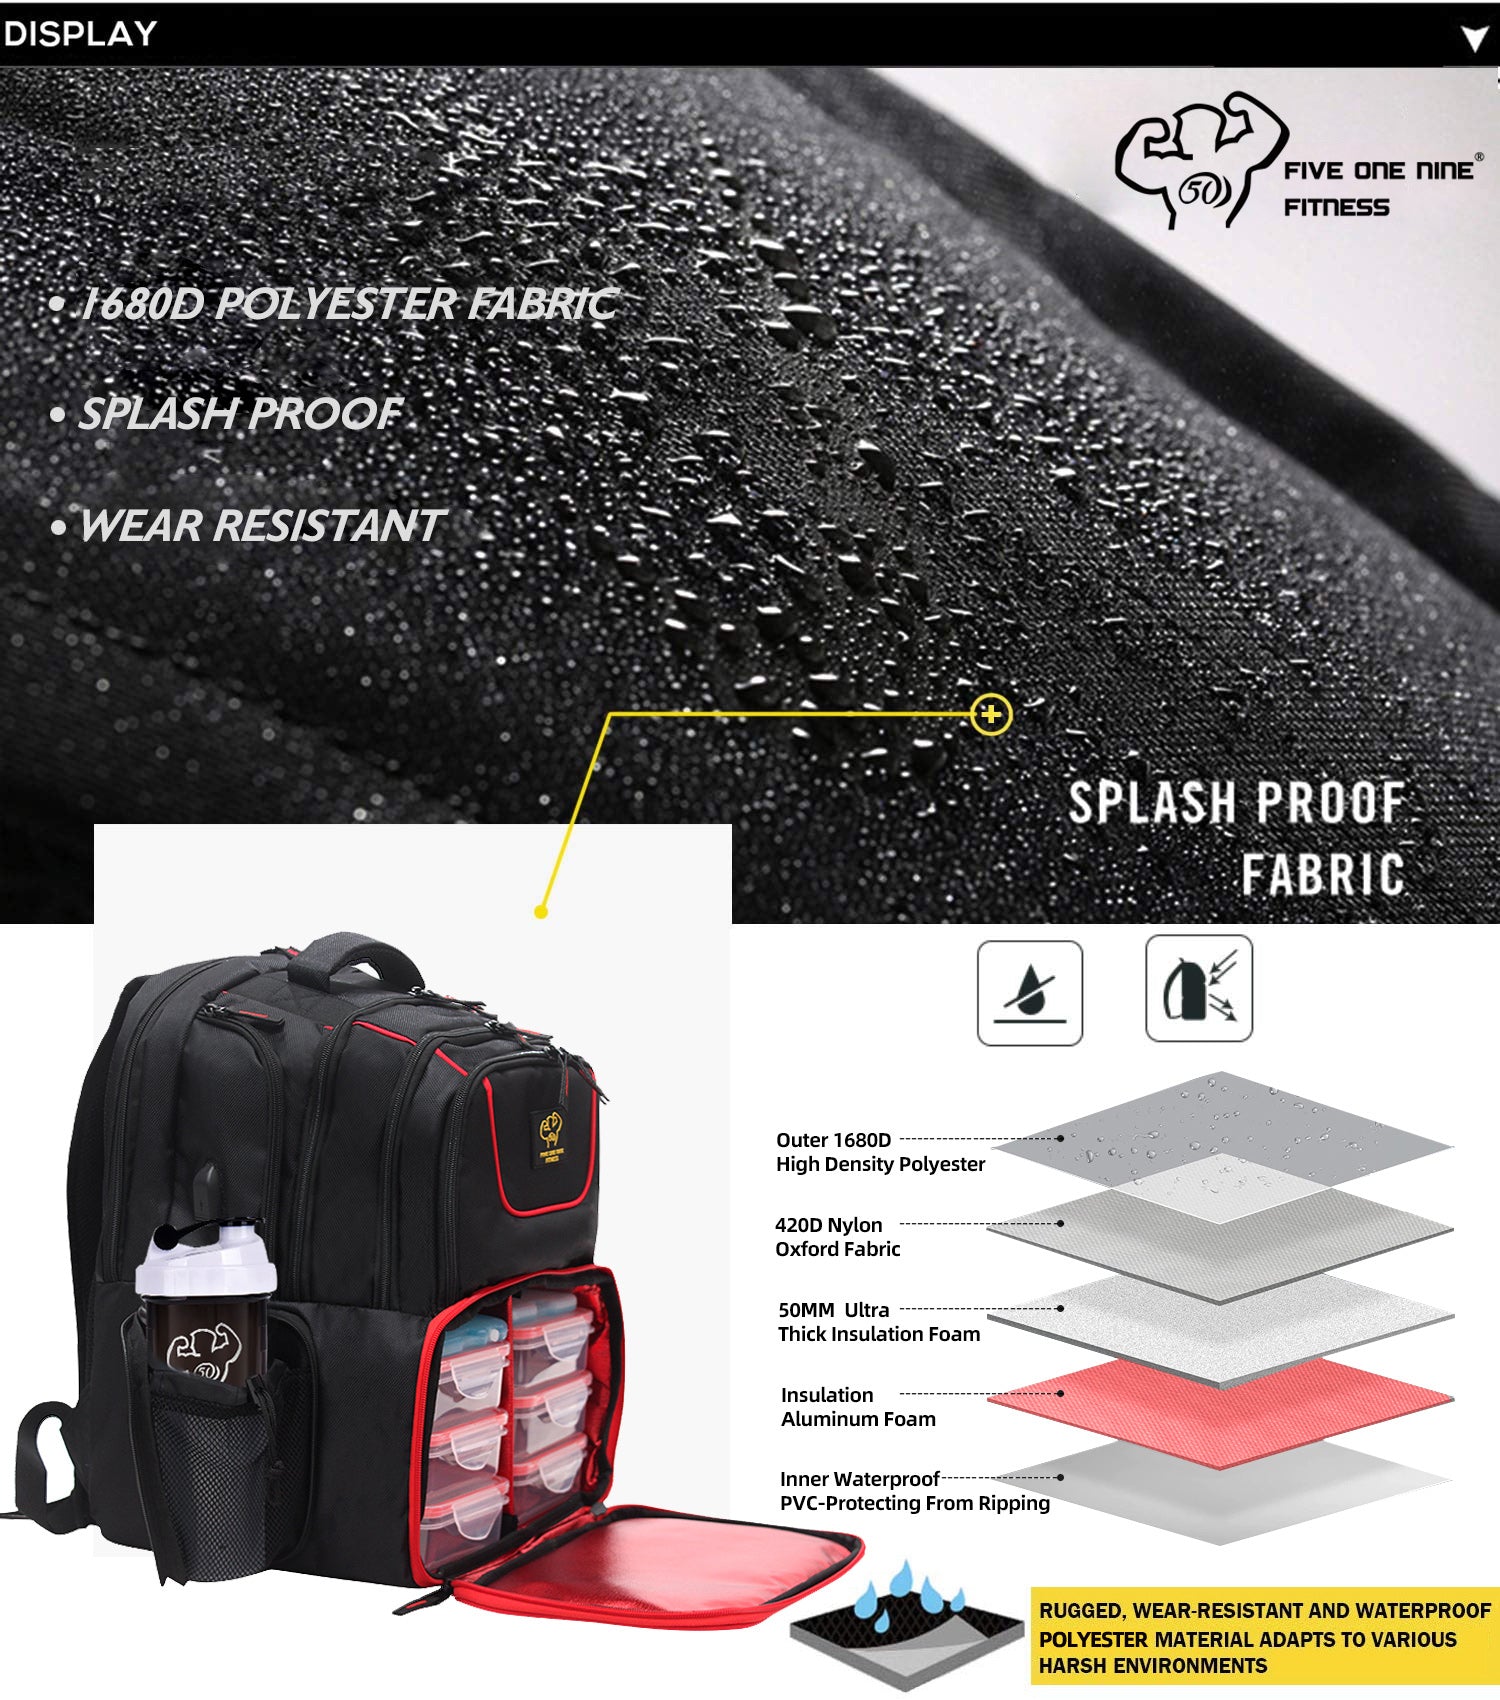 519 Fitness Meal Prep Backpack Insulated Waterproof Cooler Lunch Computer Compartment Bodybuilding Bag for Men and Women to Hiking/picnic-includes 6